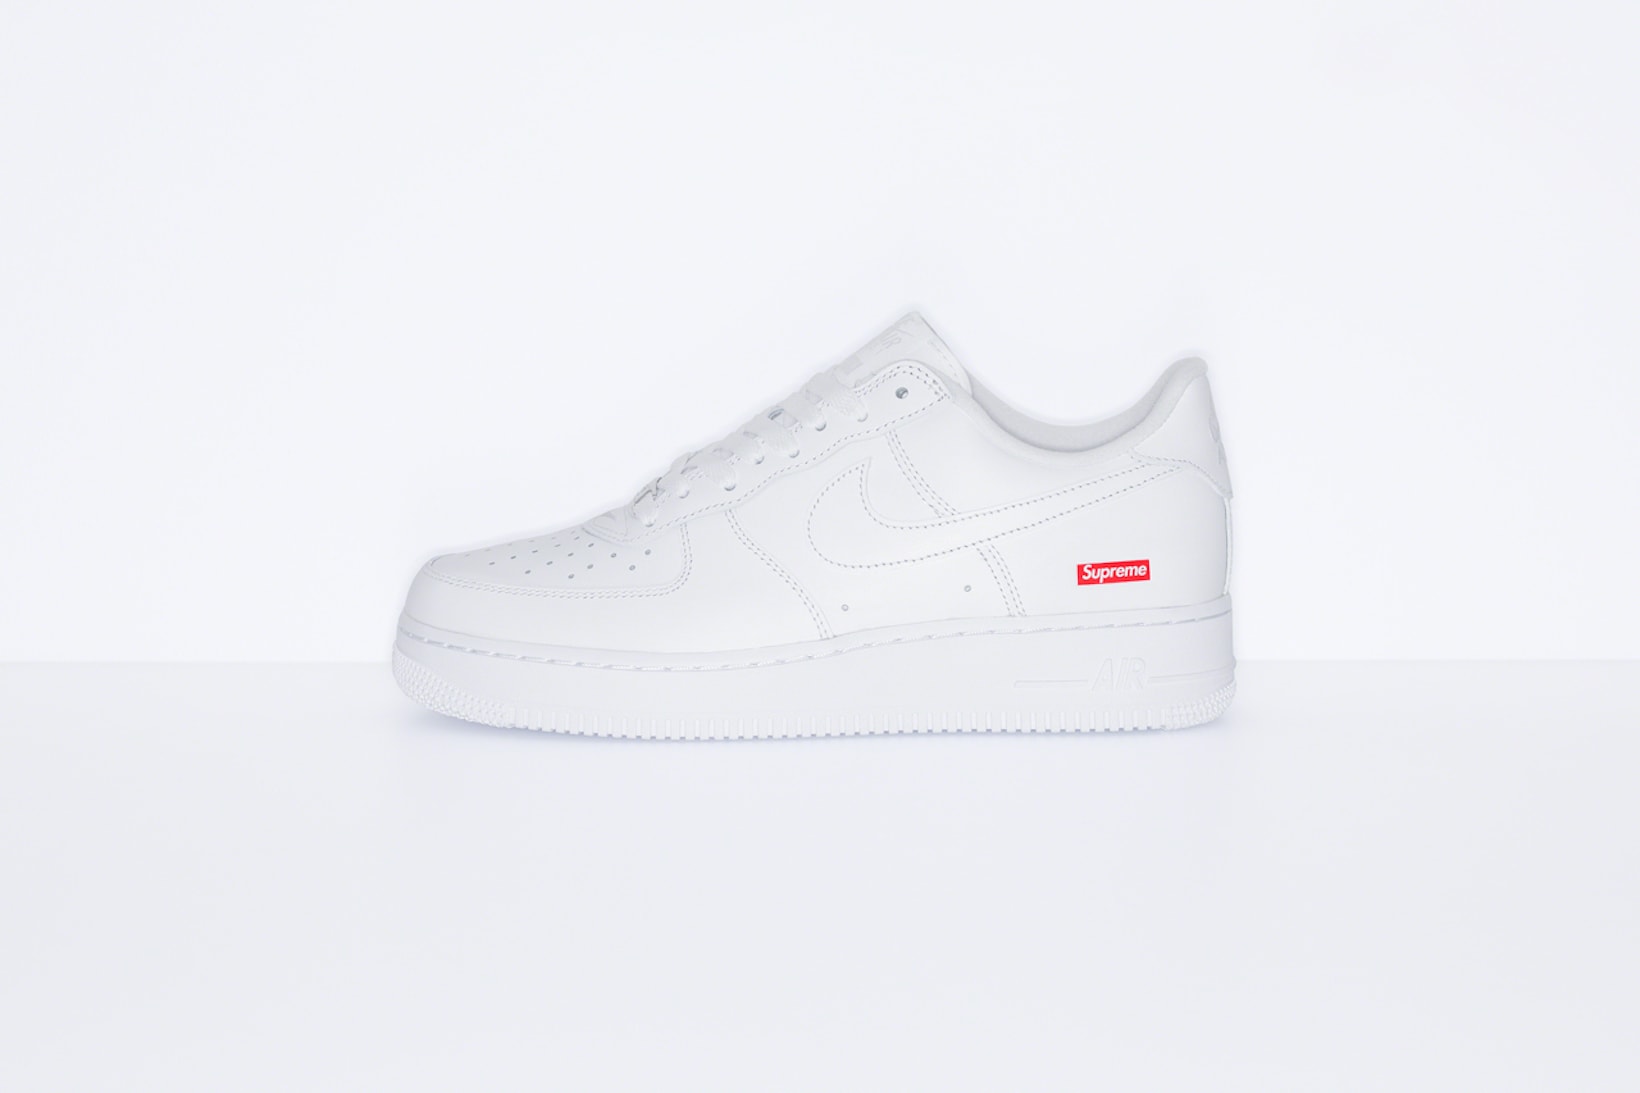 A First Look at Supreme's Nike Air Force 1 Low